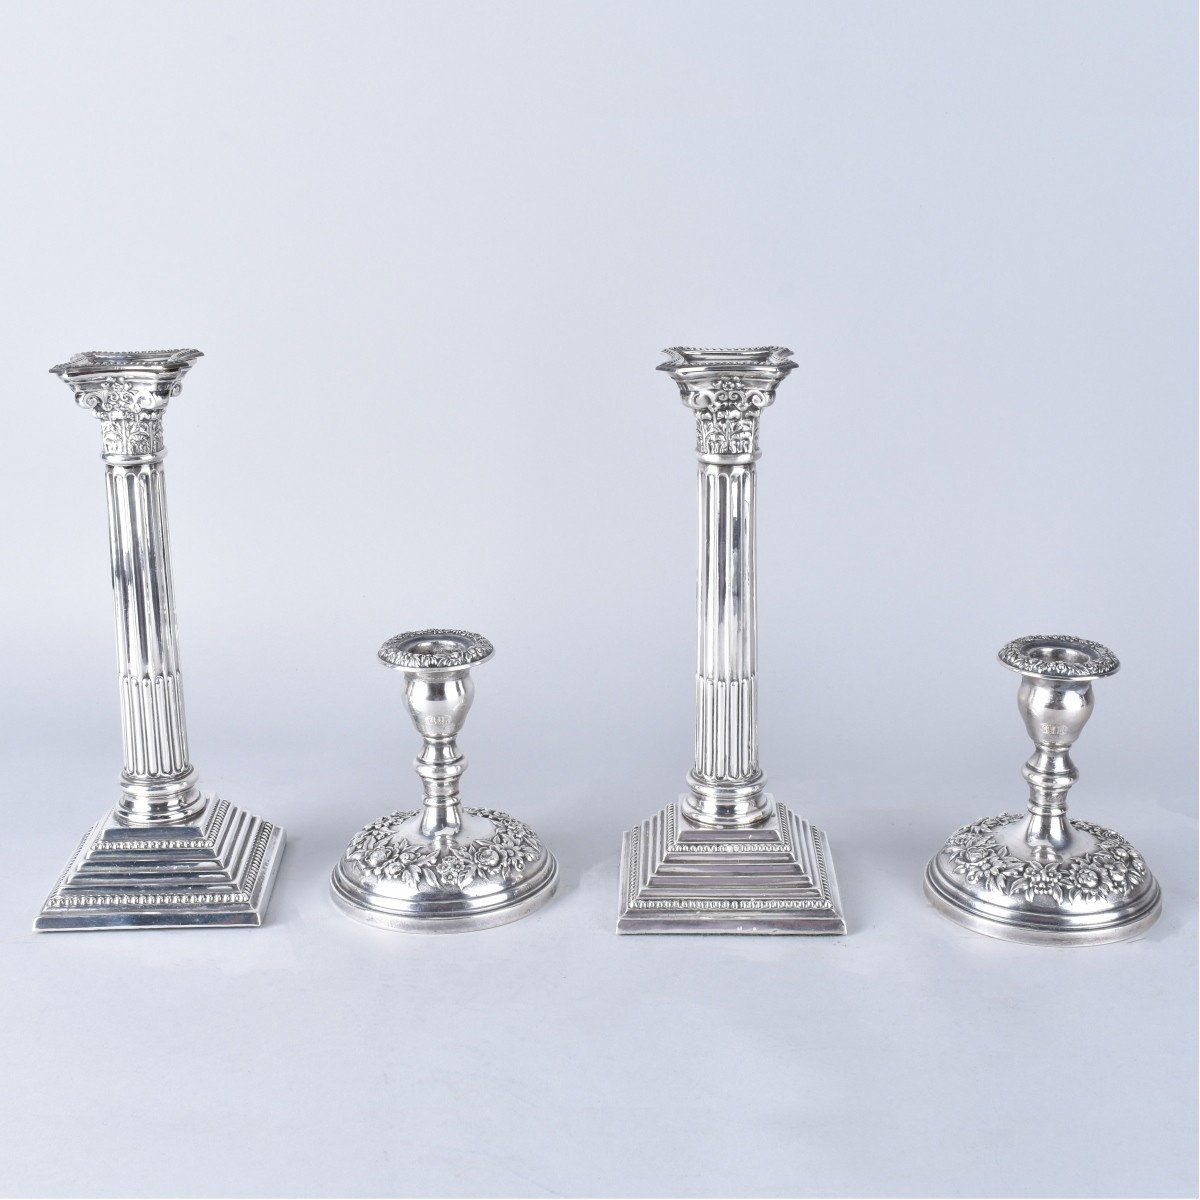 Two Pair Silver Candlesticks